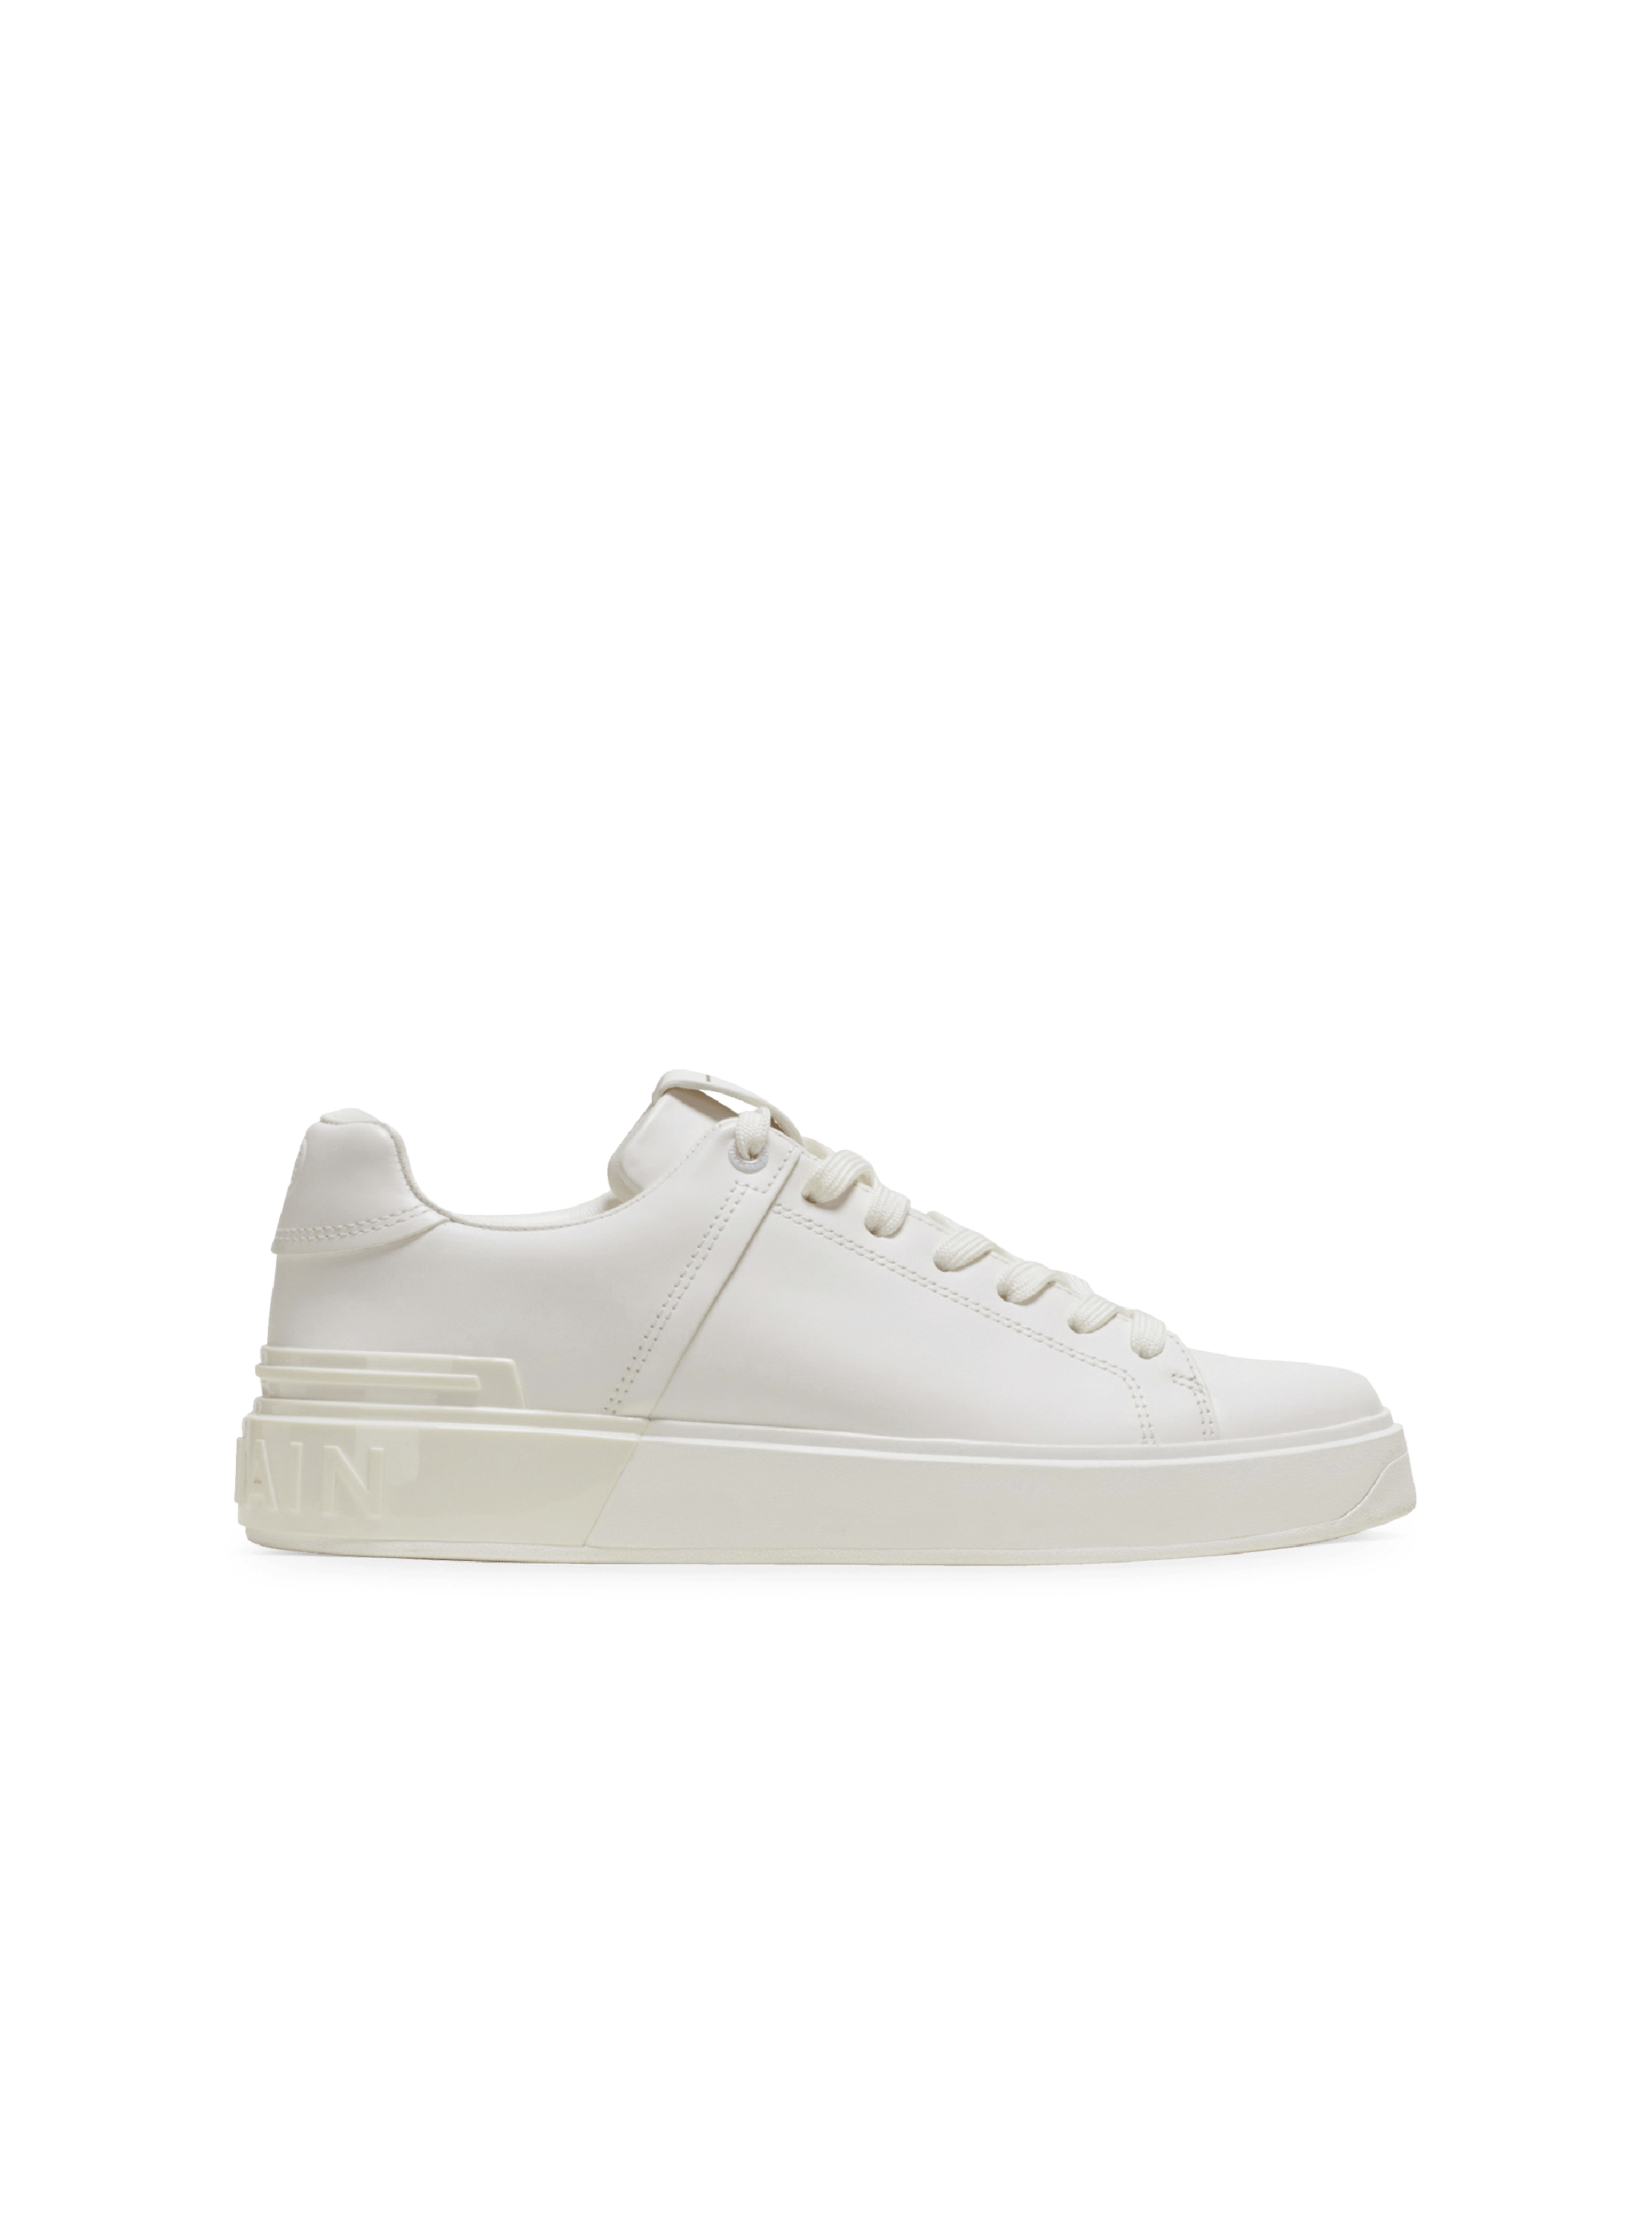 Smooth leather B-Court sneakers, white, hi-res